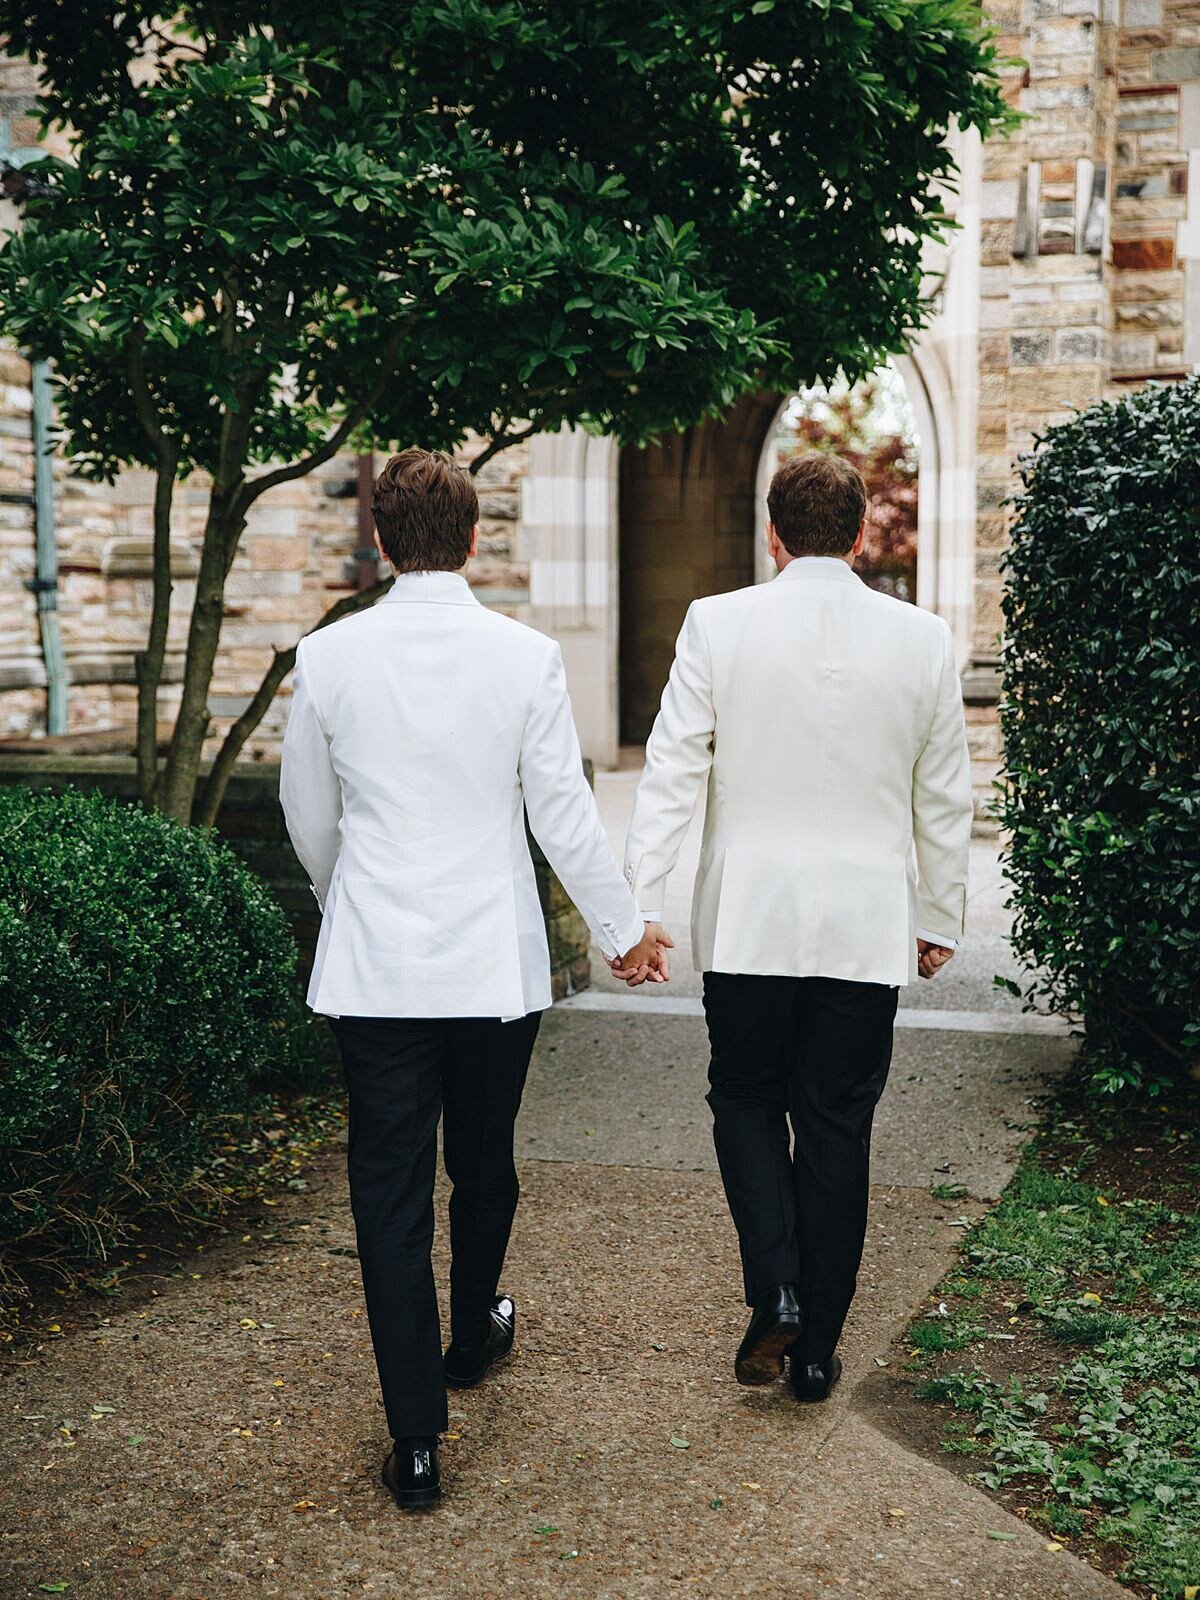 Two grooms wearing tuxedos with white jackets walk away hand in hand